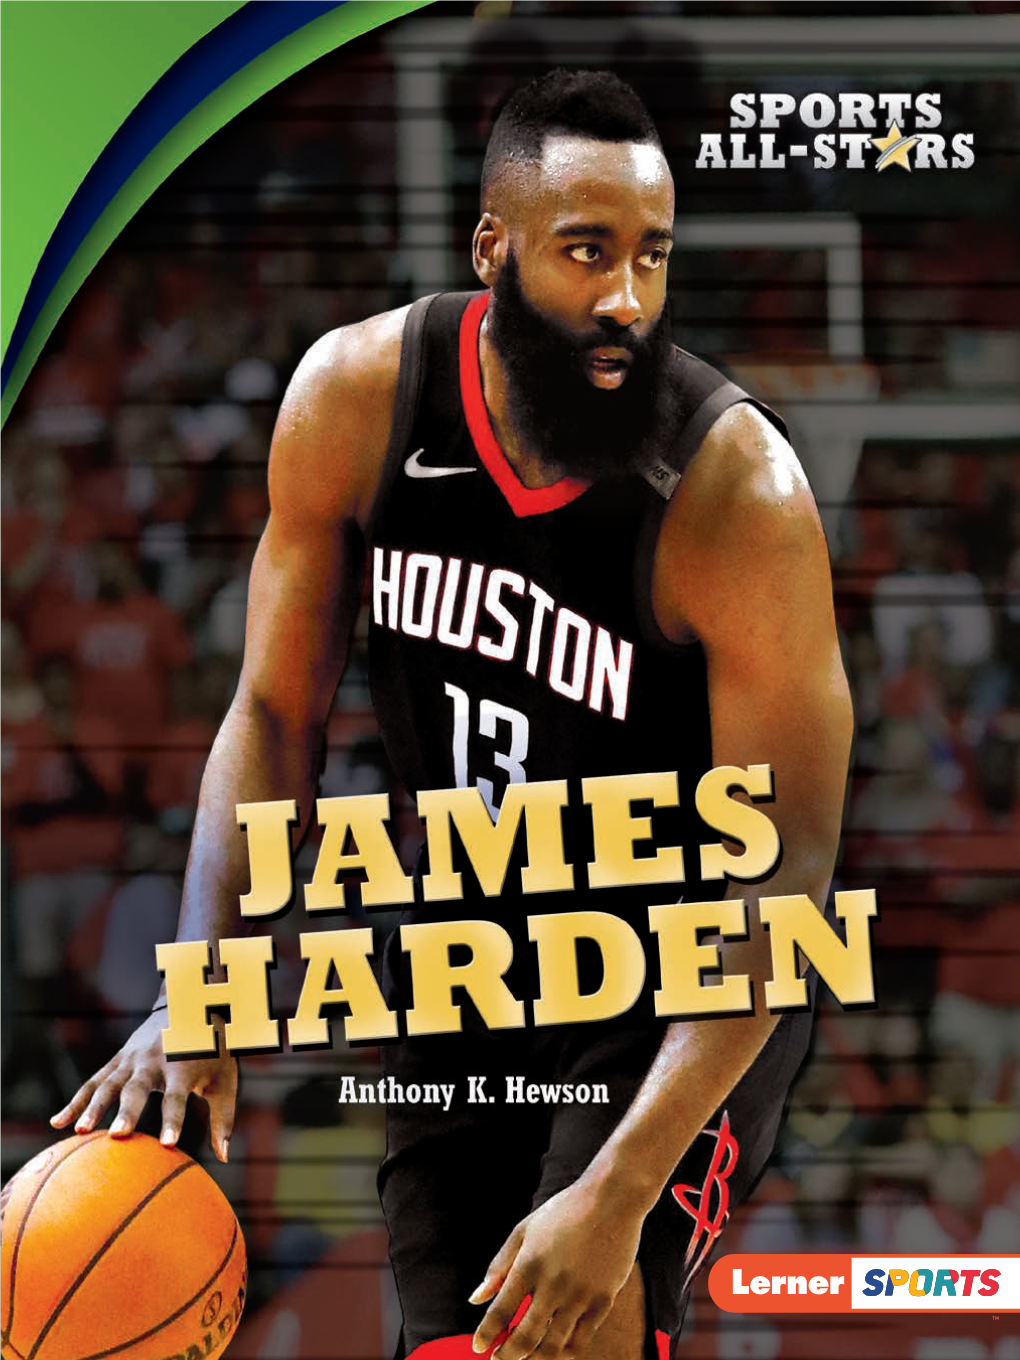 James Harden Plays for the Houston Rockets in the National Basketball Association (NBA)